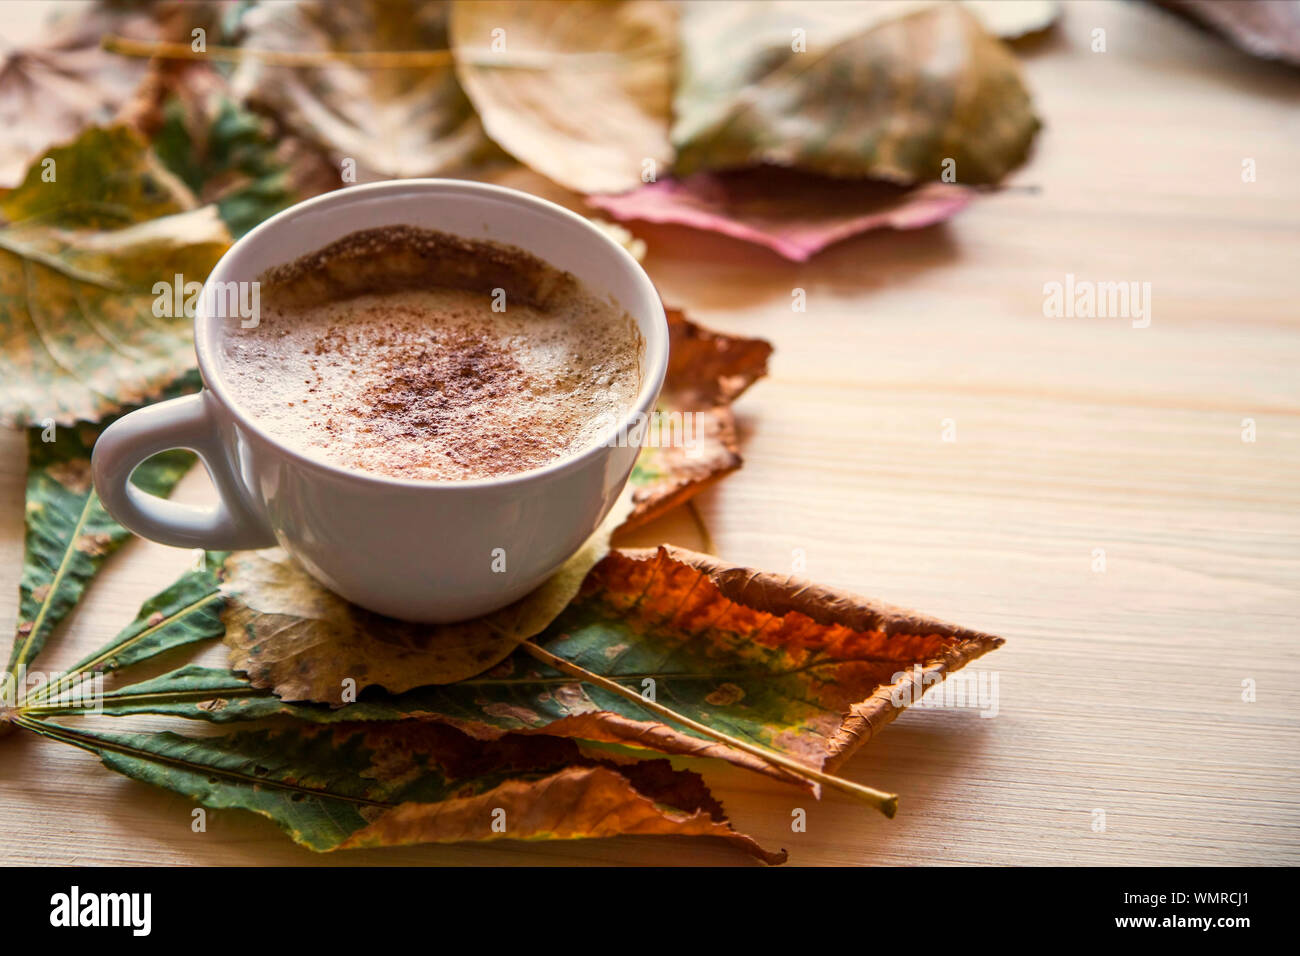 Autumn coffee cup with dried leaves decoration on wooden table, cozy fall deco concept, home lifestyle warm coffee cup in autumn season Stock Photo